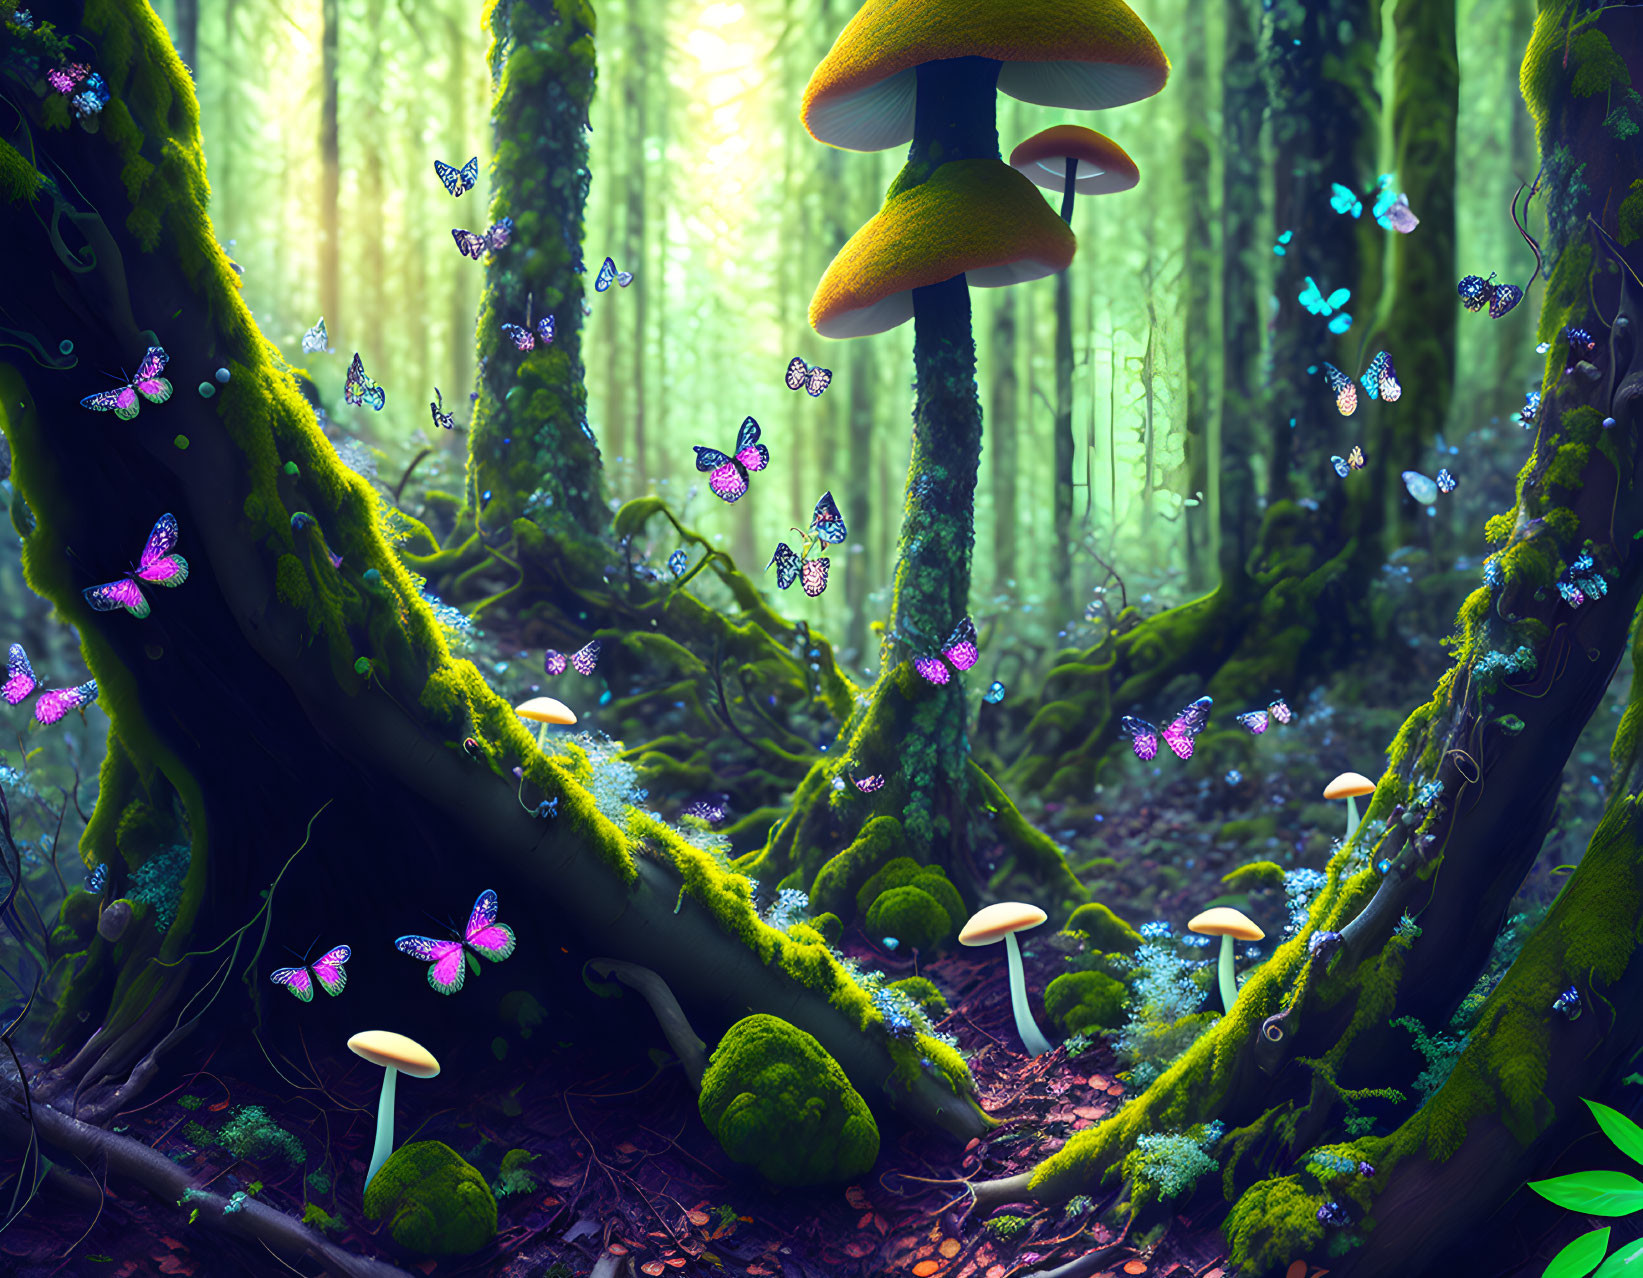 Enchanting forest scene with oversized mushrooms, vibrant butterflies, and moss-covered trees